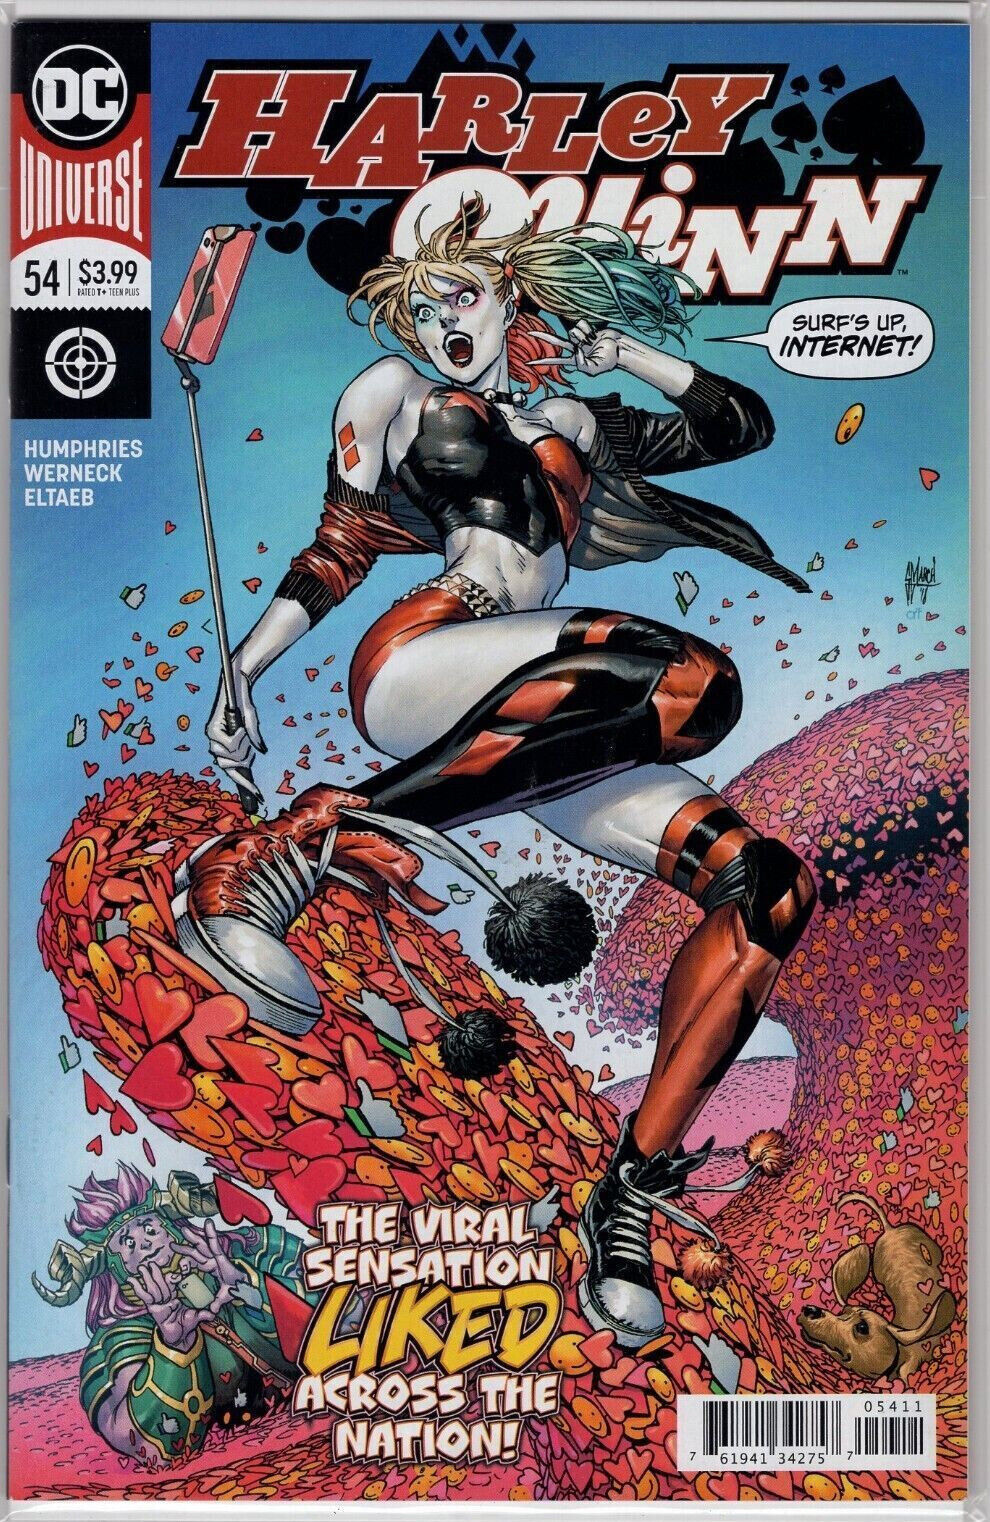 HARLEY QUINN #54 DC COMICS 2018 50 cents combined shipping